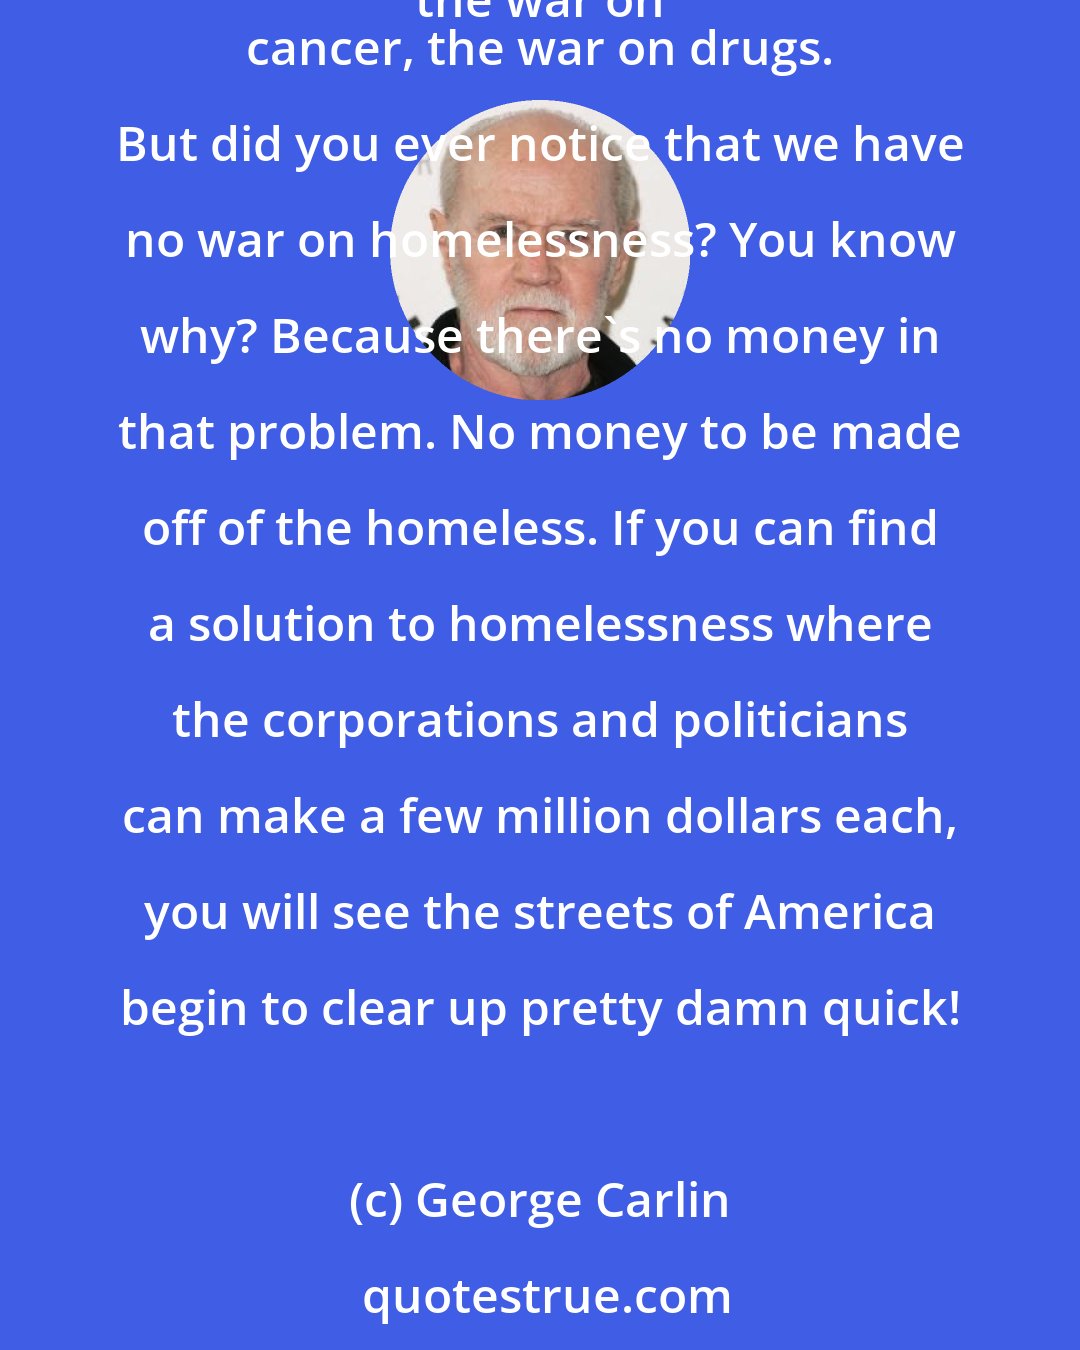 George Carlin: Have you ever noticed that the only metaphor we have in our public discourse for solving problems is to declare war on it? We have the war on crime, the war on 
 cancer, the war on drugs. But did you ever notice that we have no war on homelessness? You know why? Because there's no money in that problem. No money to be made off of the homeless. If you can find a solution to homelessness where the corporations and politicians can make a few million dollars each, you will see the streets of America begin to clear up pretty damn quick!